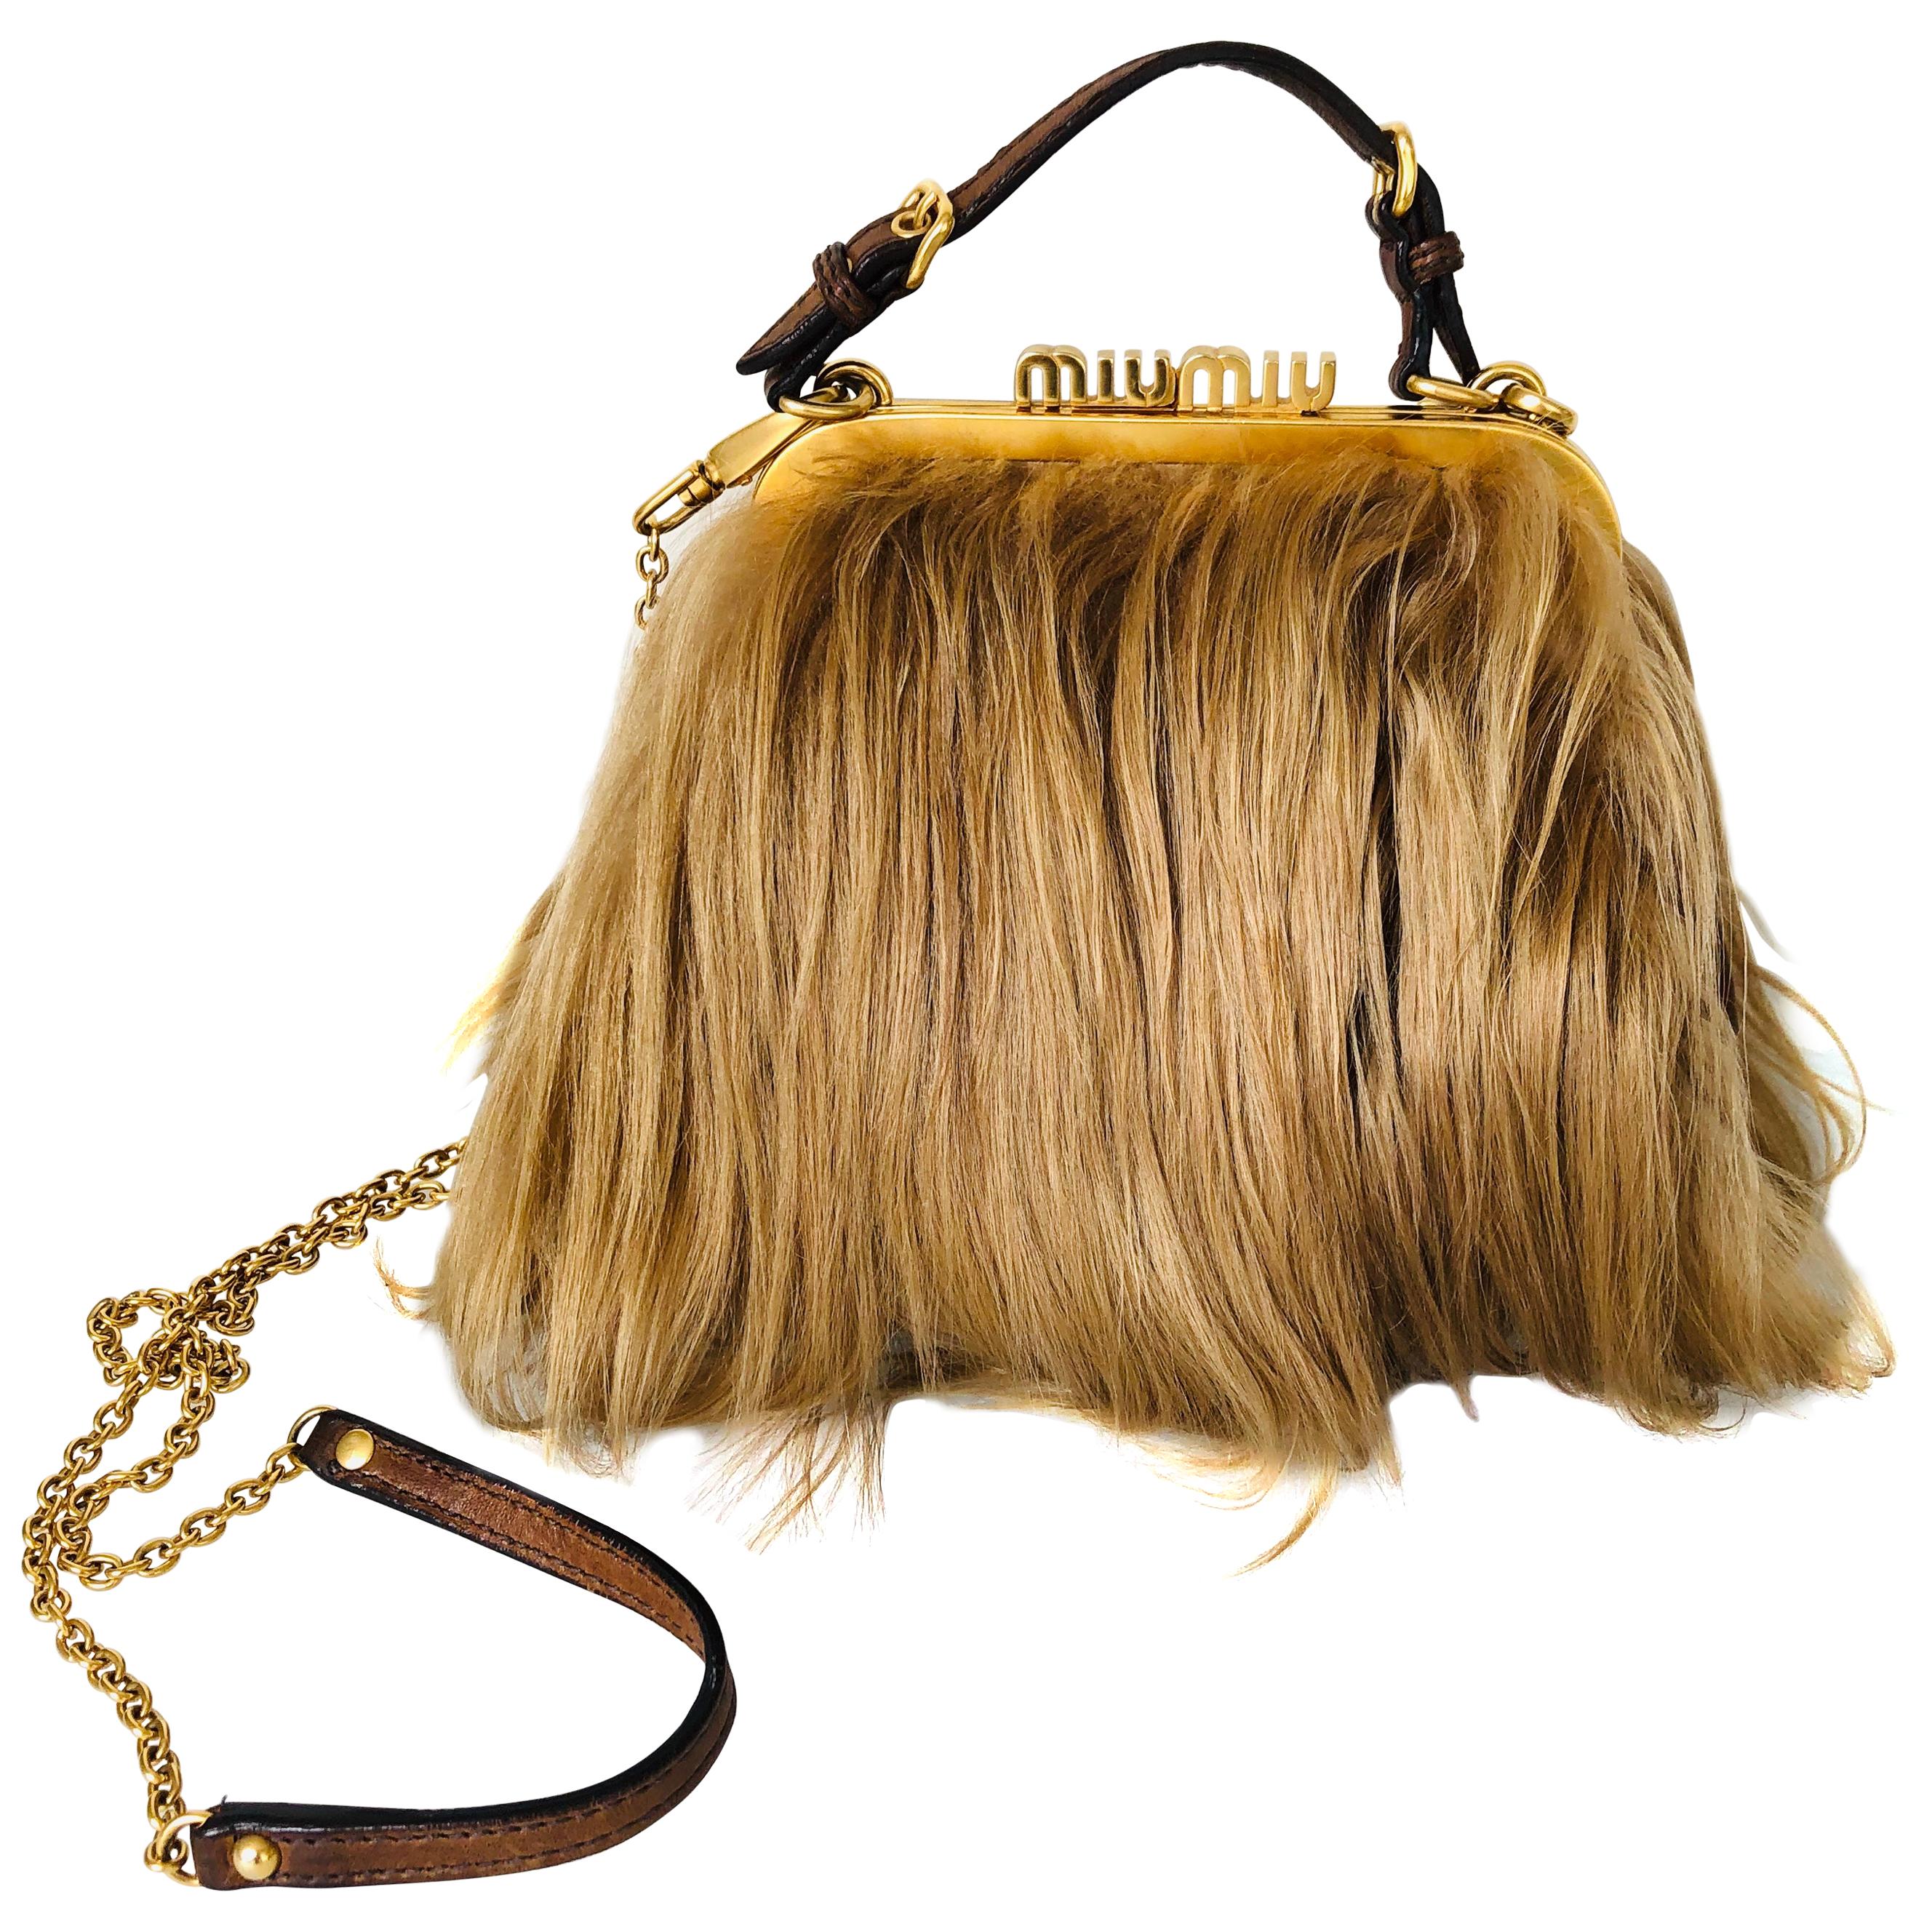 Stunning MIU MIU Mongolian goat fur bag featuring detachable shoulder strap, gold chain with leather details, long goat hair and leather trimmings, top clutch closure, interior in brown cotton, gold hardware, Made in Italy.

Serial number: